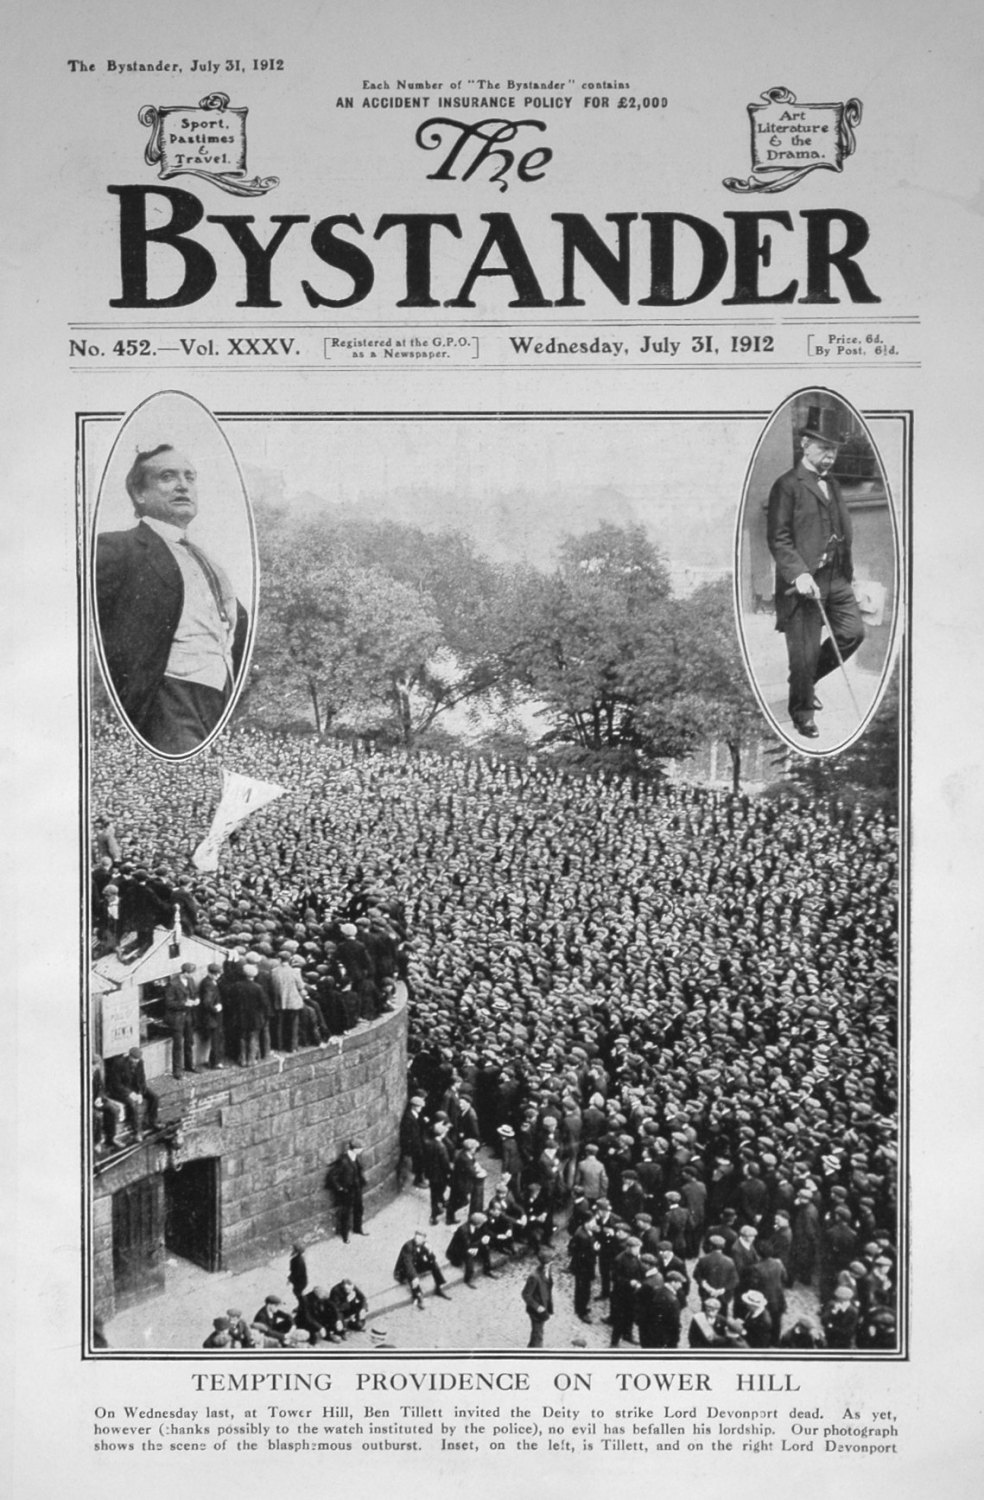 The Bystander July 31st 1912.